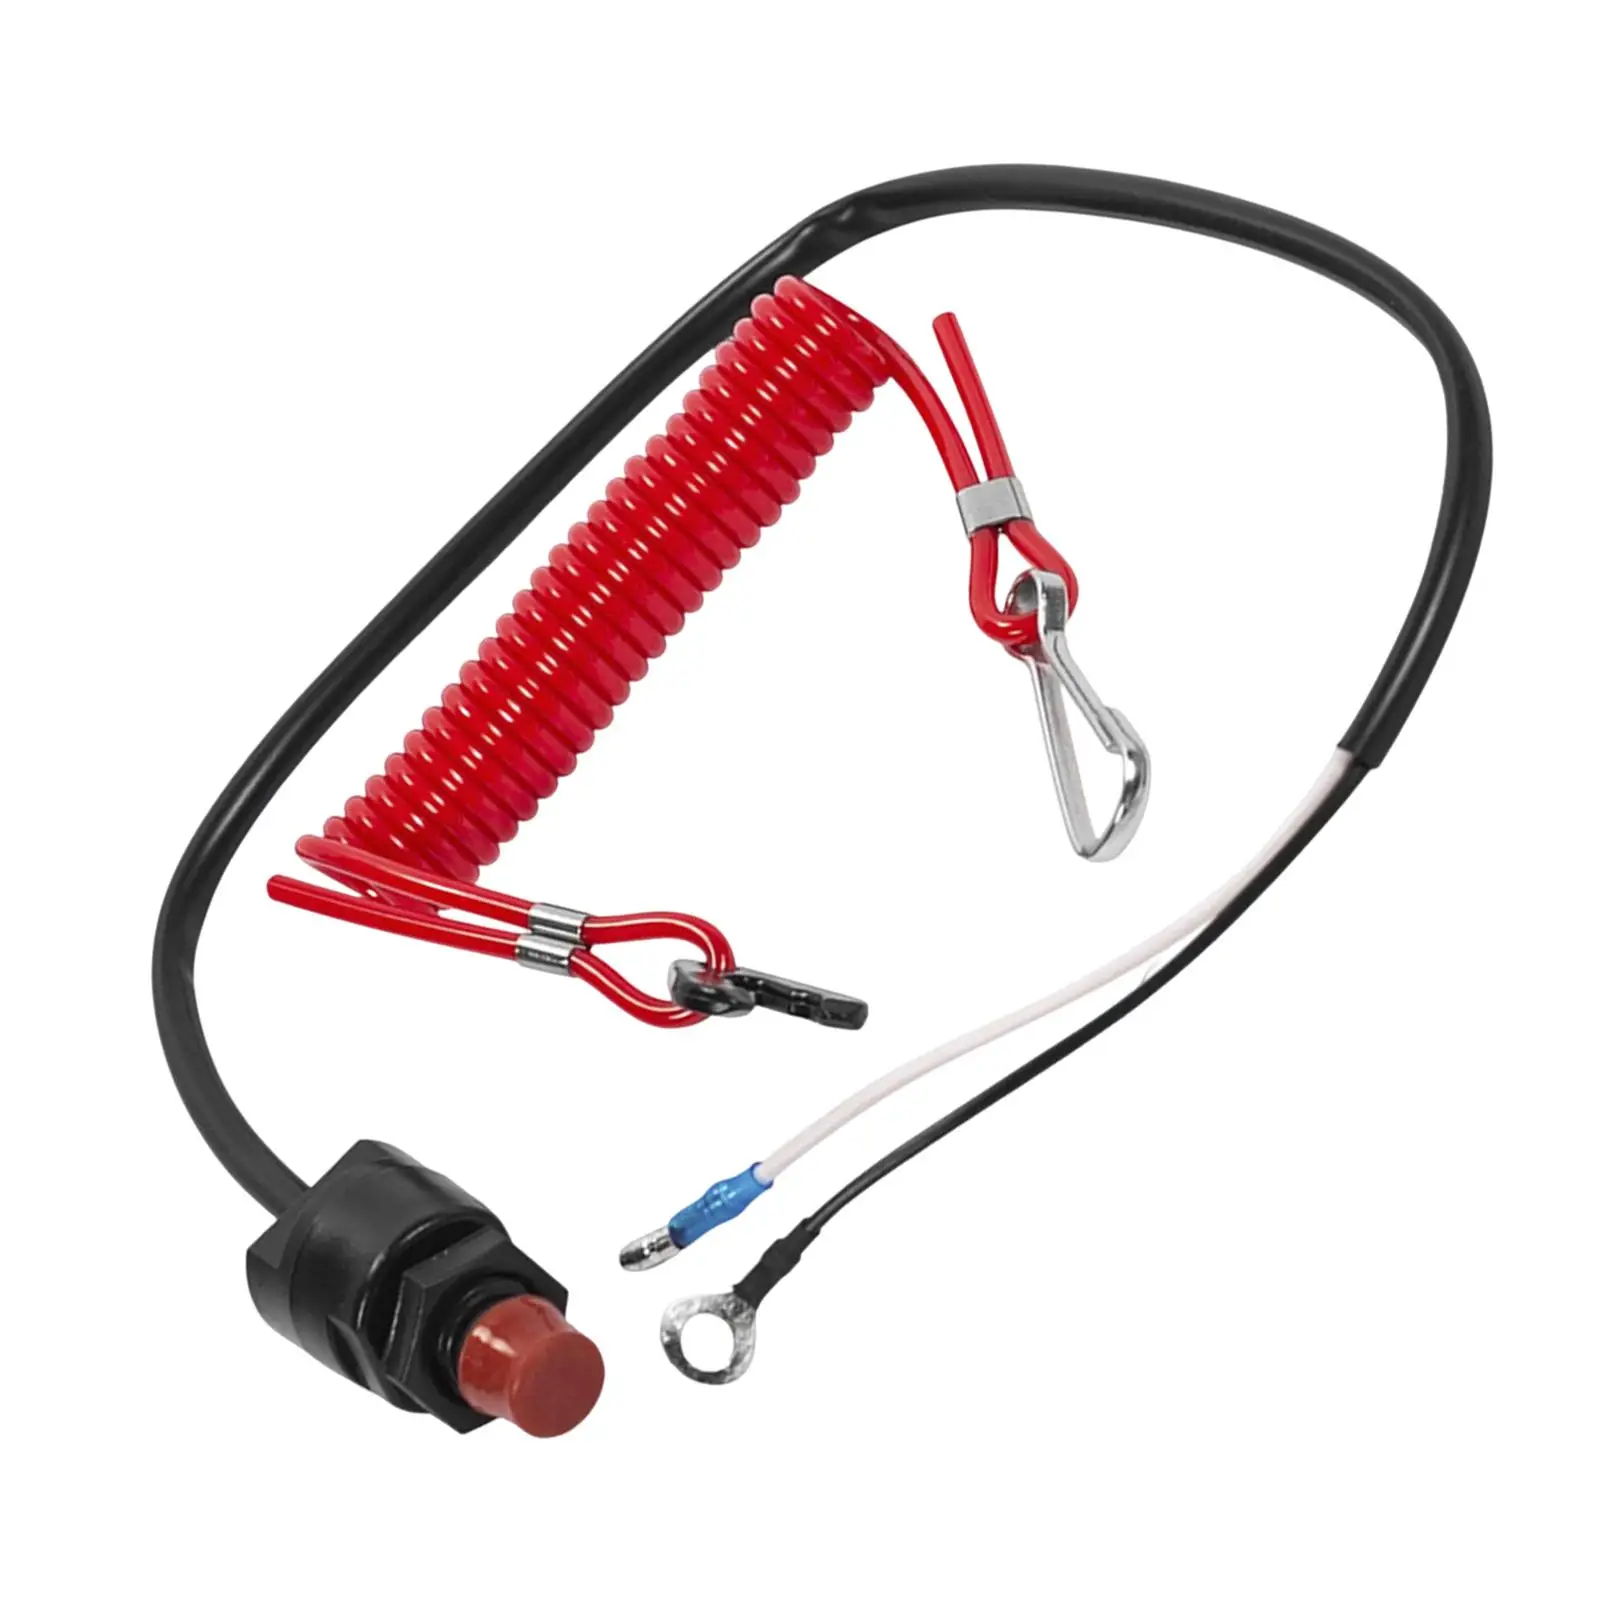 Flameout Switch Safety Tether Lanyard Strap Cord Suit Red for Motorboat